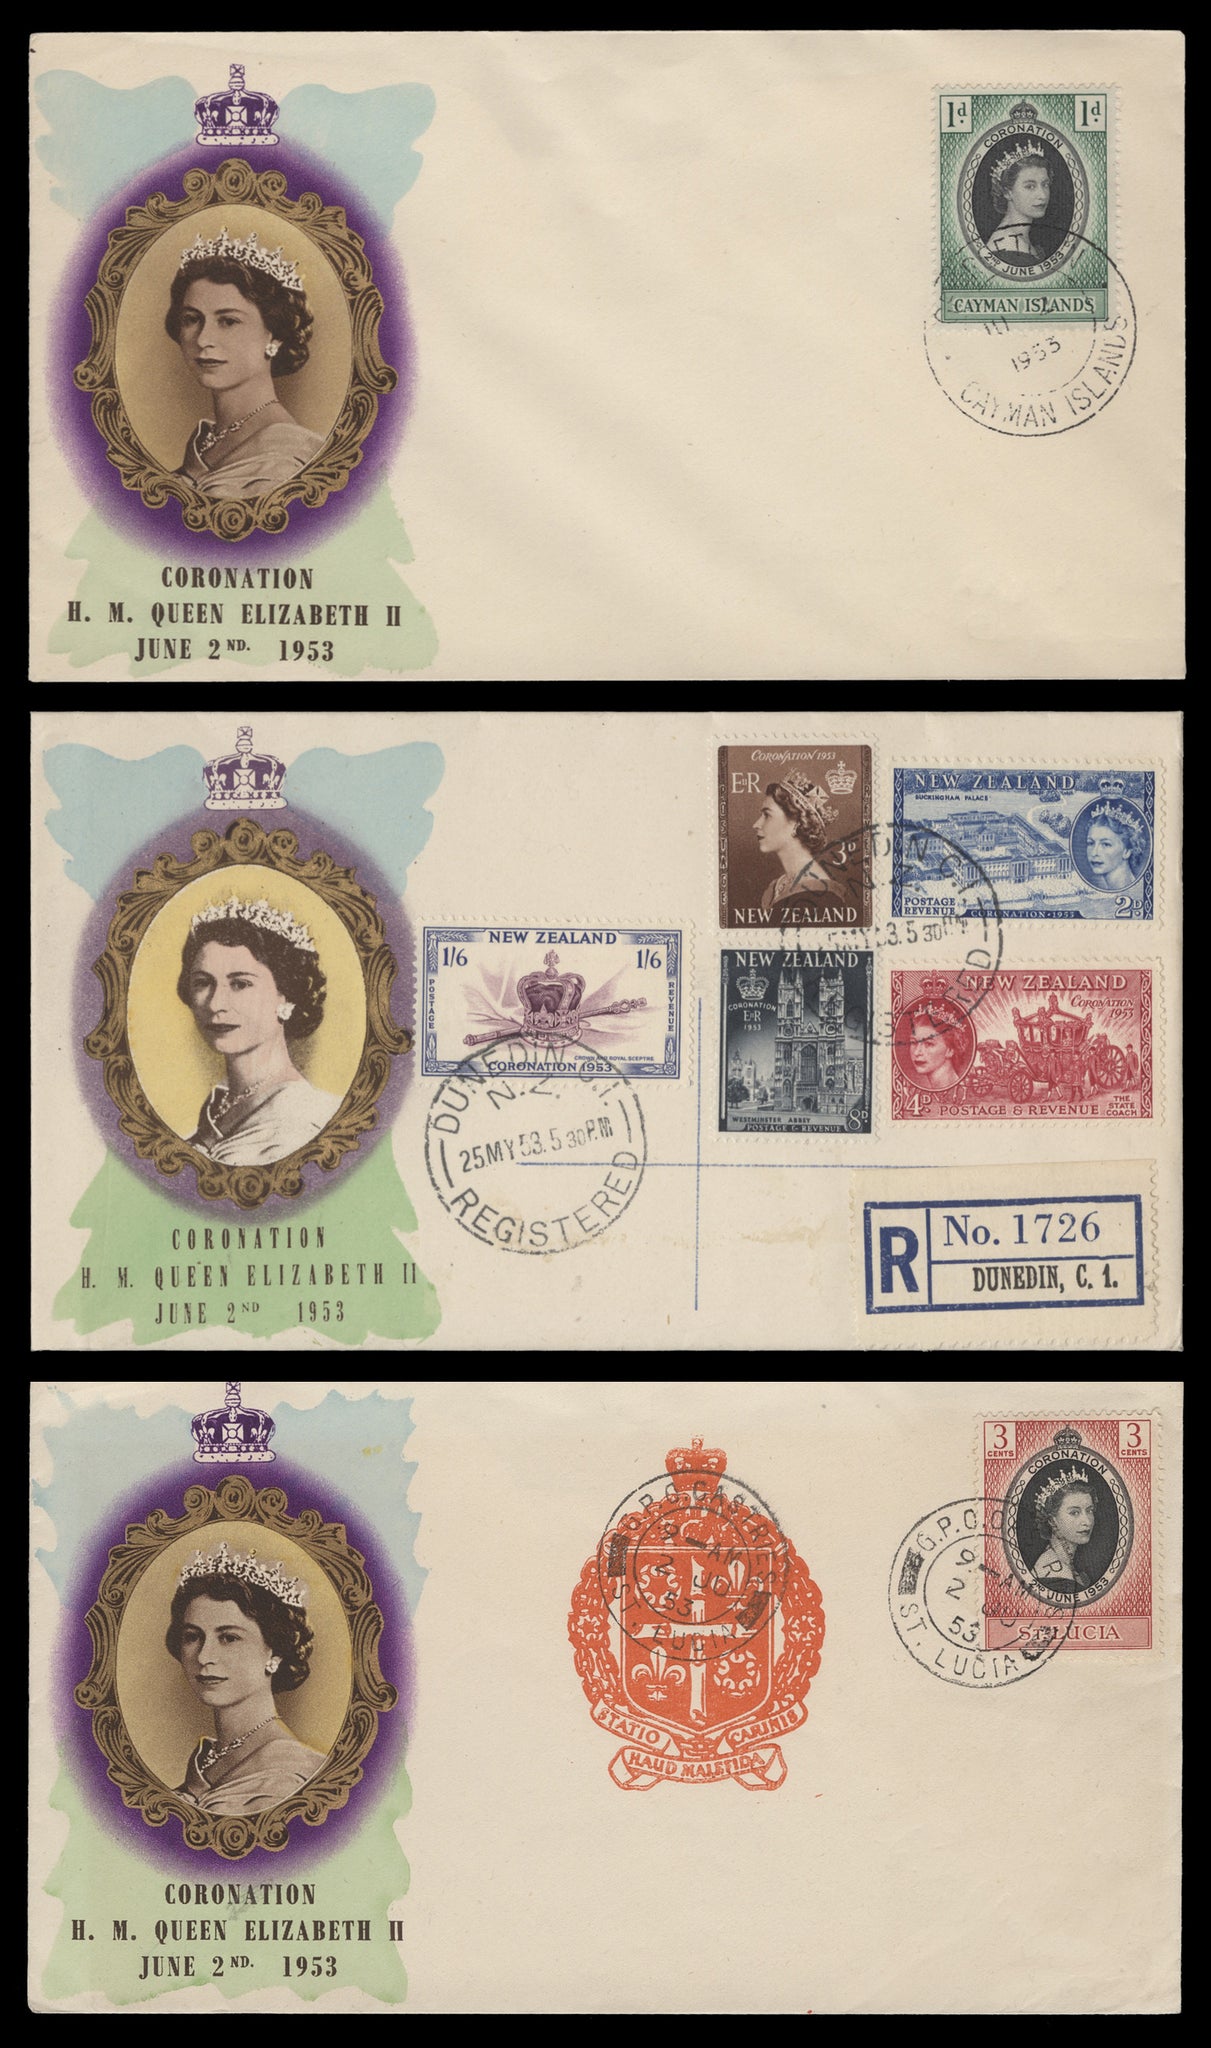 1953 Coronation BPA/PTS covers colour embellished by Overseas Mailers